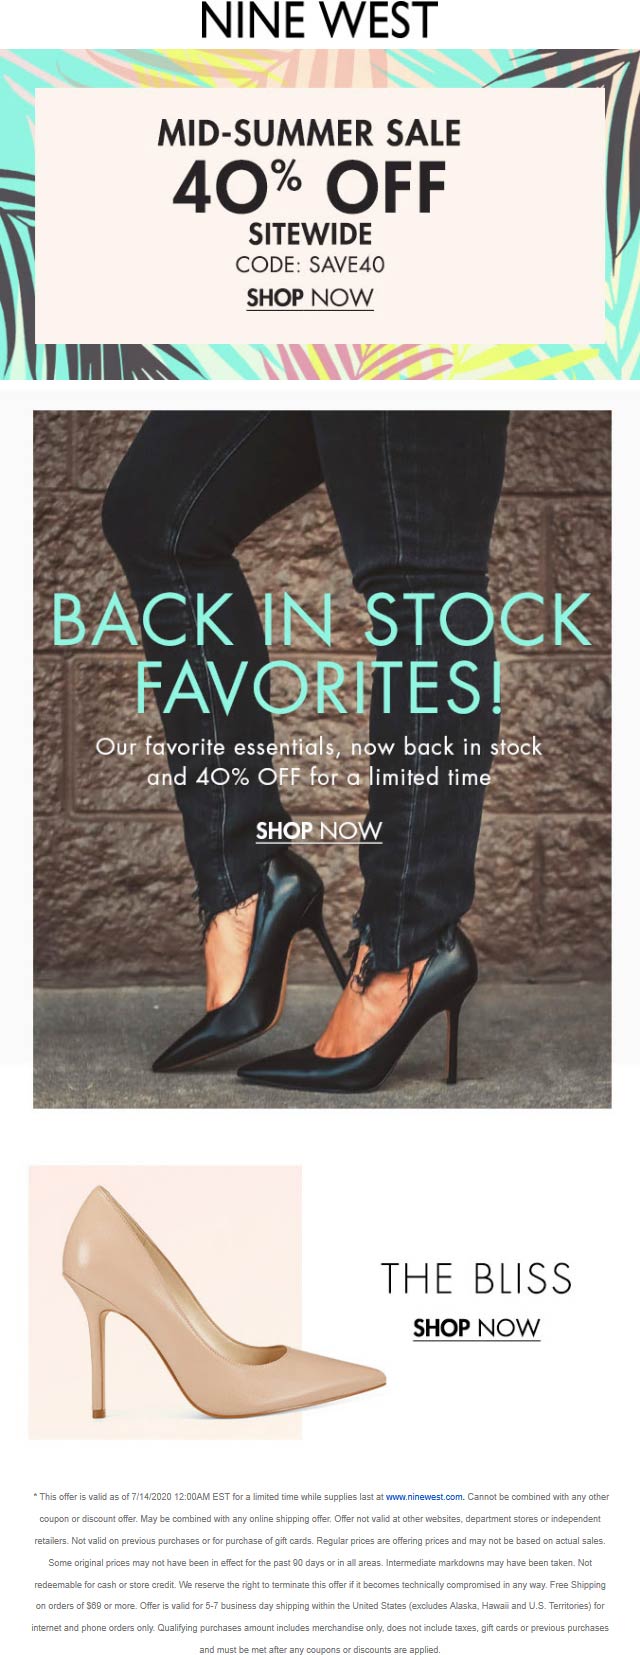 Nine West stores Coupon  40% off everything online at Nine West via promo code SAVE40 #ninewest 